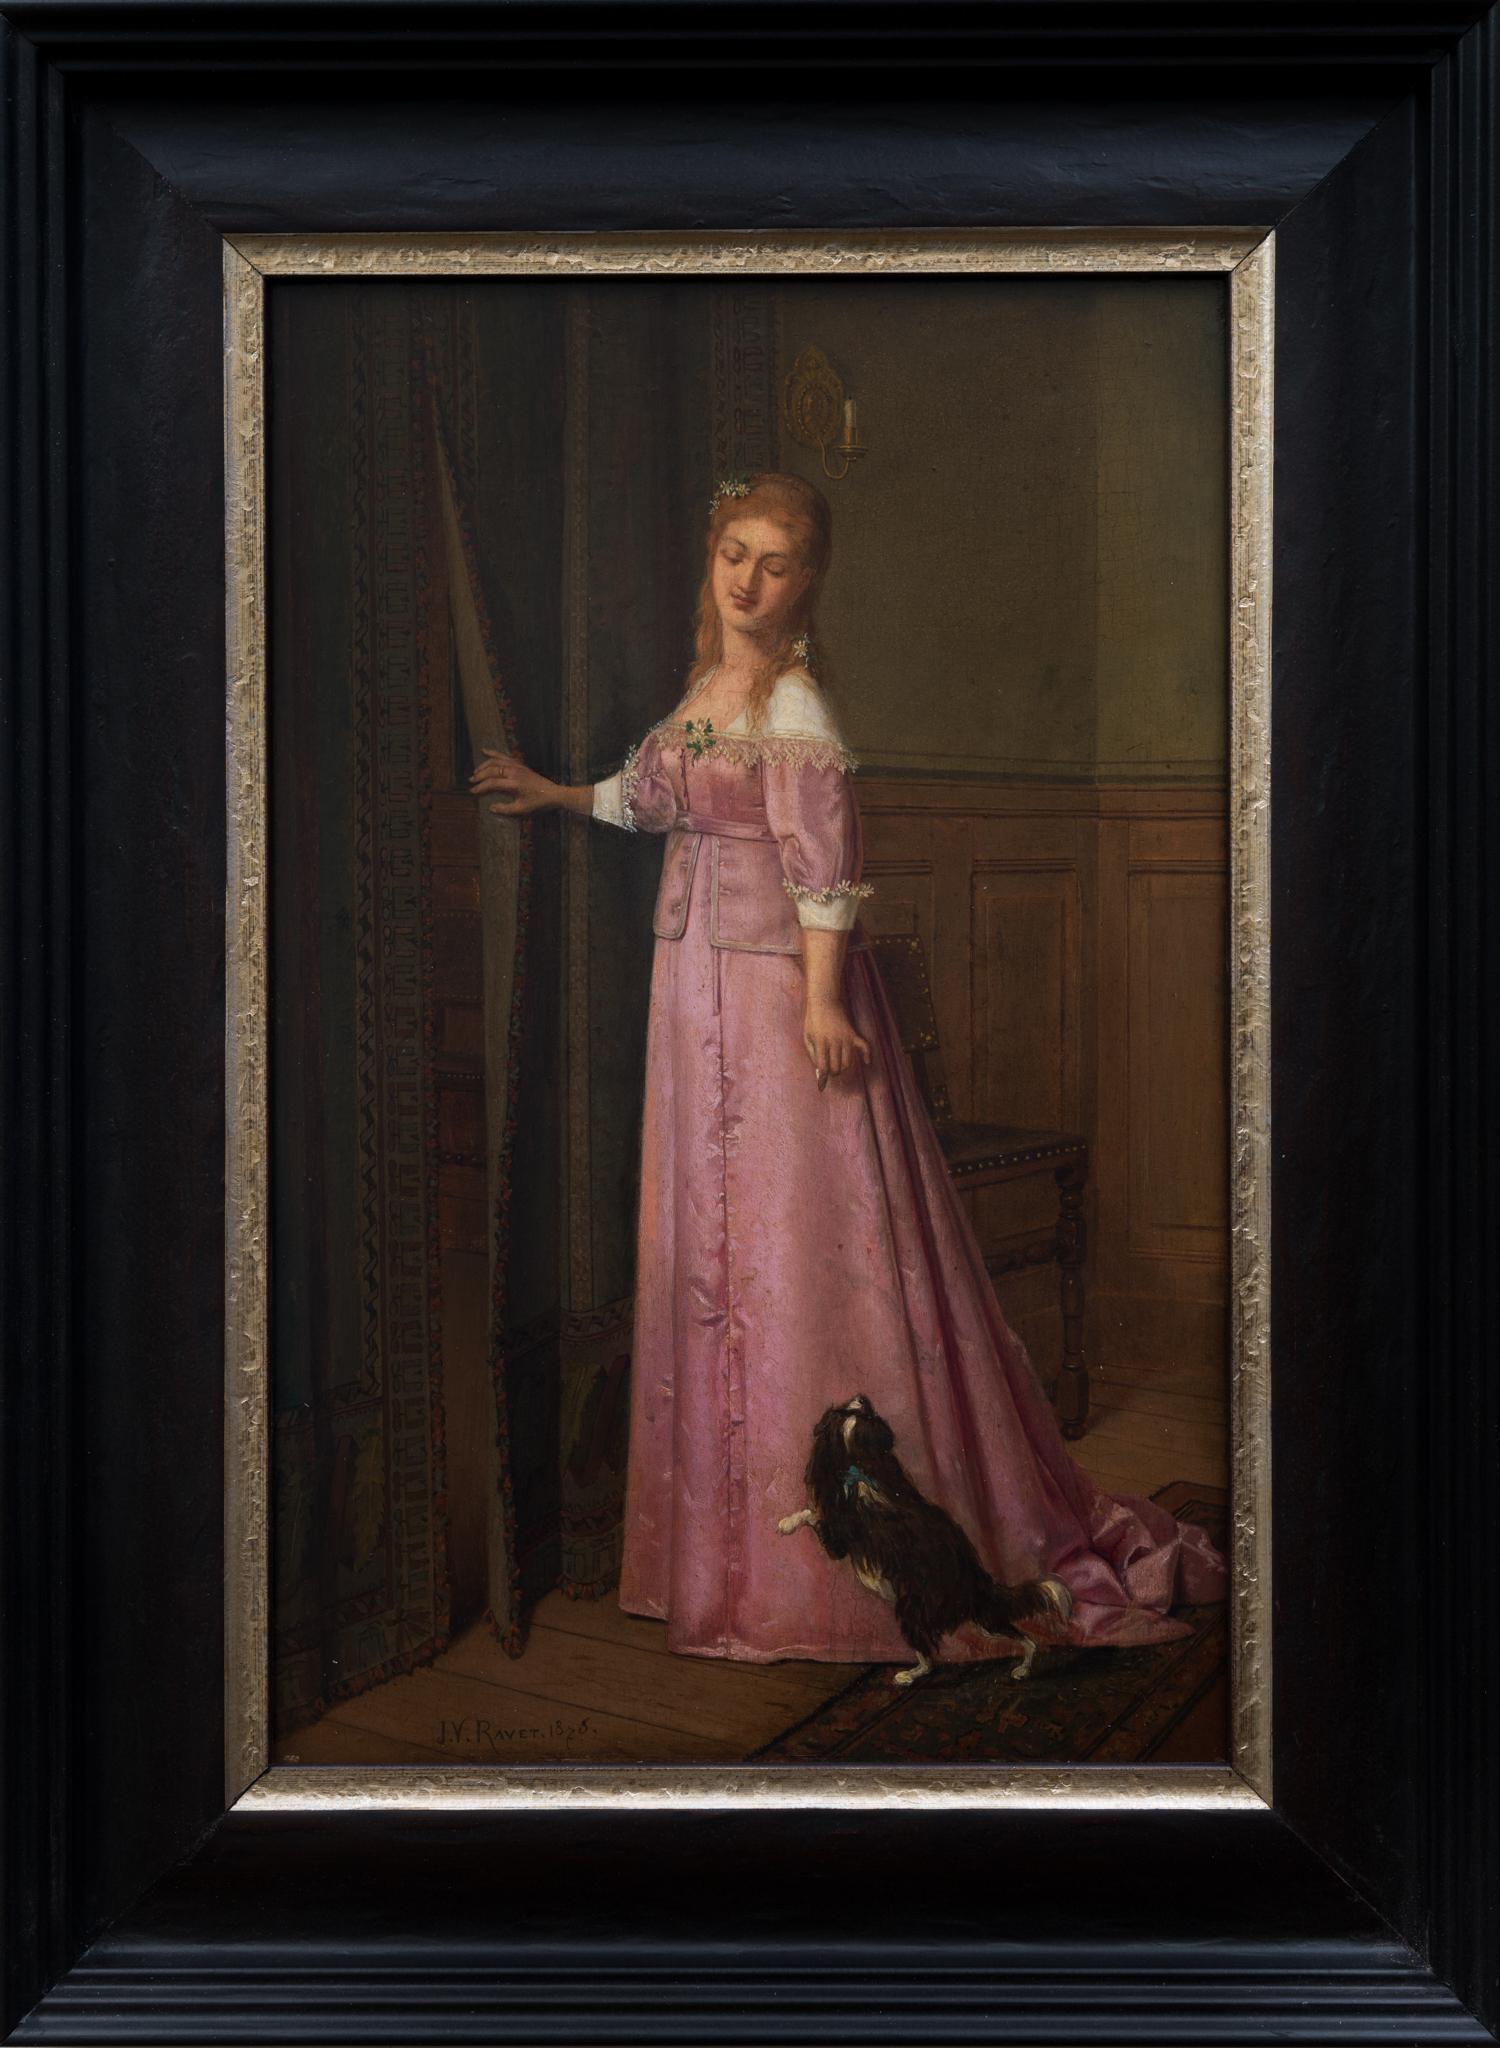 In this exquisite painting by Victor Ravet, we are transported to an elegant interior setting reminiscent of the grandeur of high-class homes. The focal point is a woman adorned in a shimmering pink gown, radiating grace and sophistication. Bathed